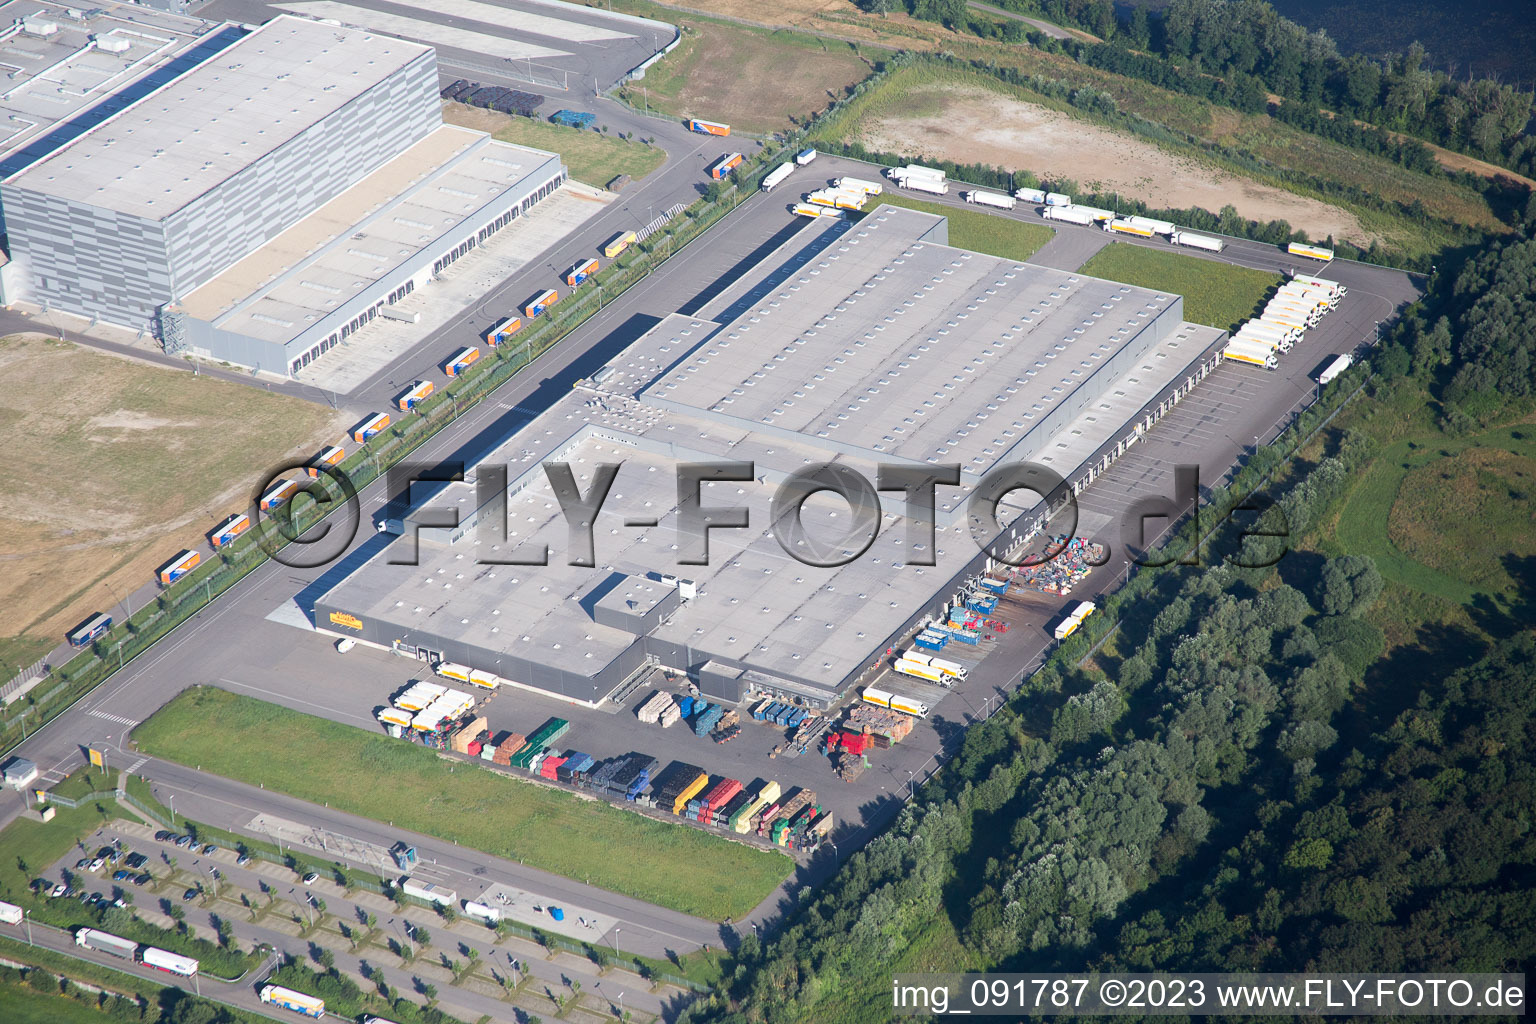 Oberwald industrial area in Wörth am Rhein in the state Rhineland-Palatinate, Germany from the plane